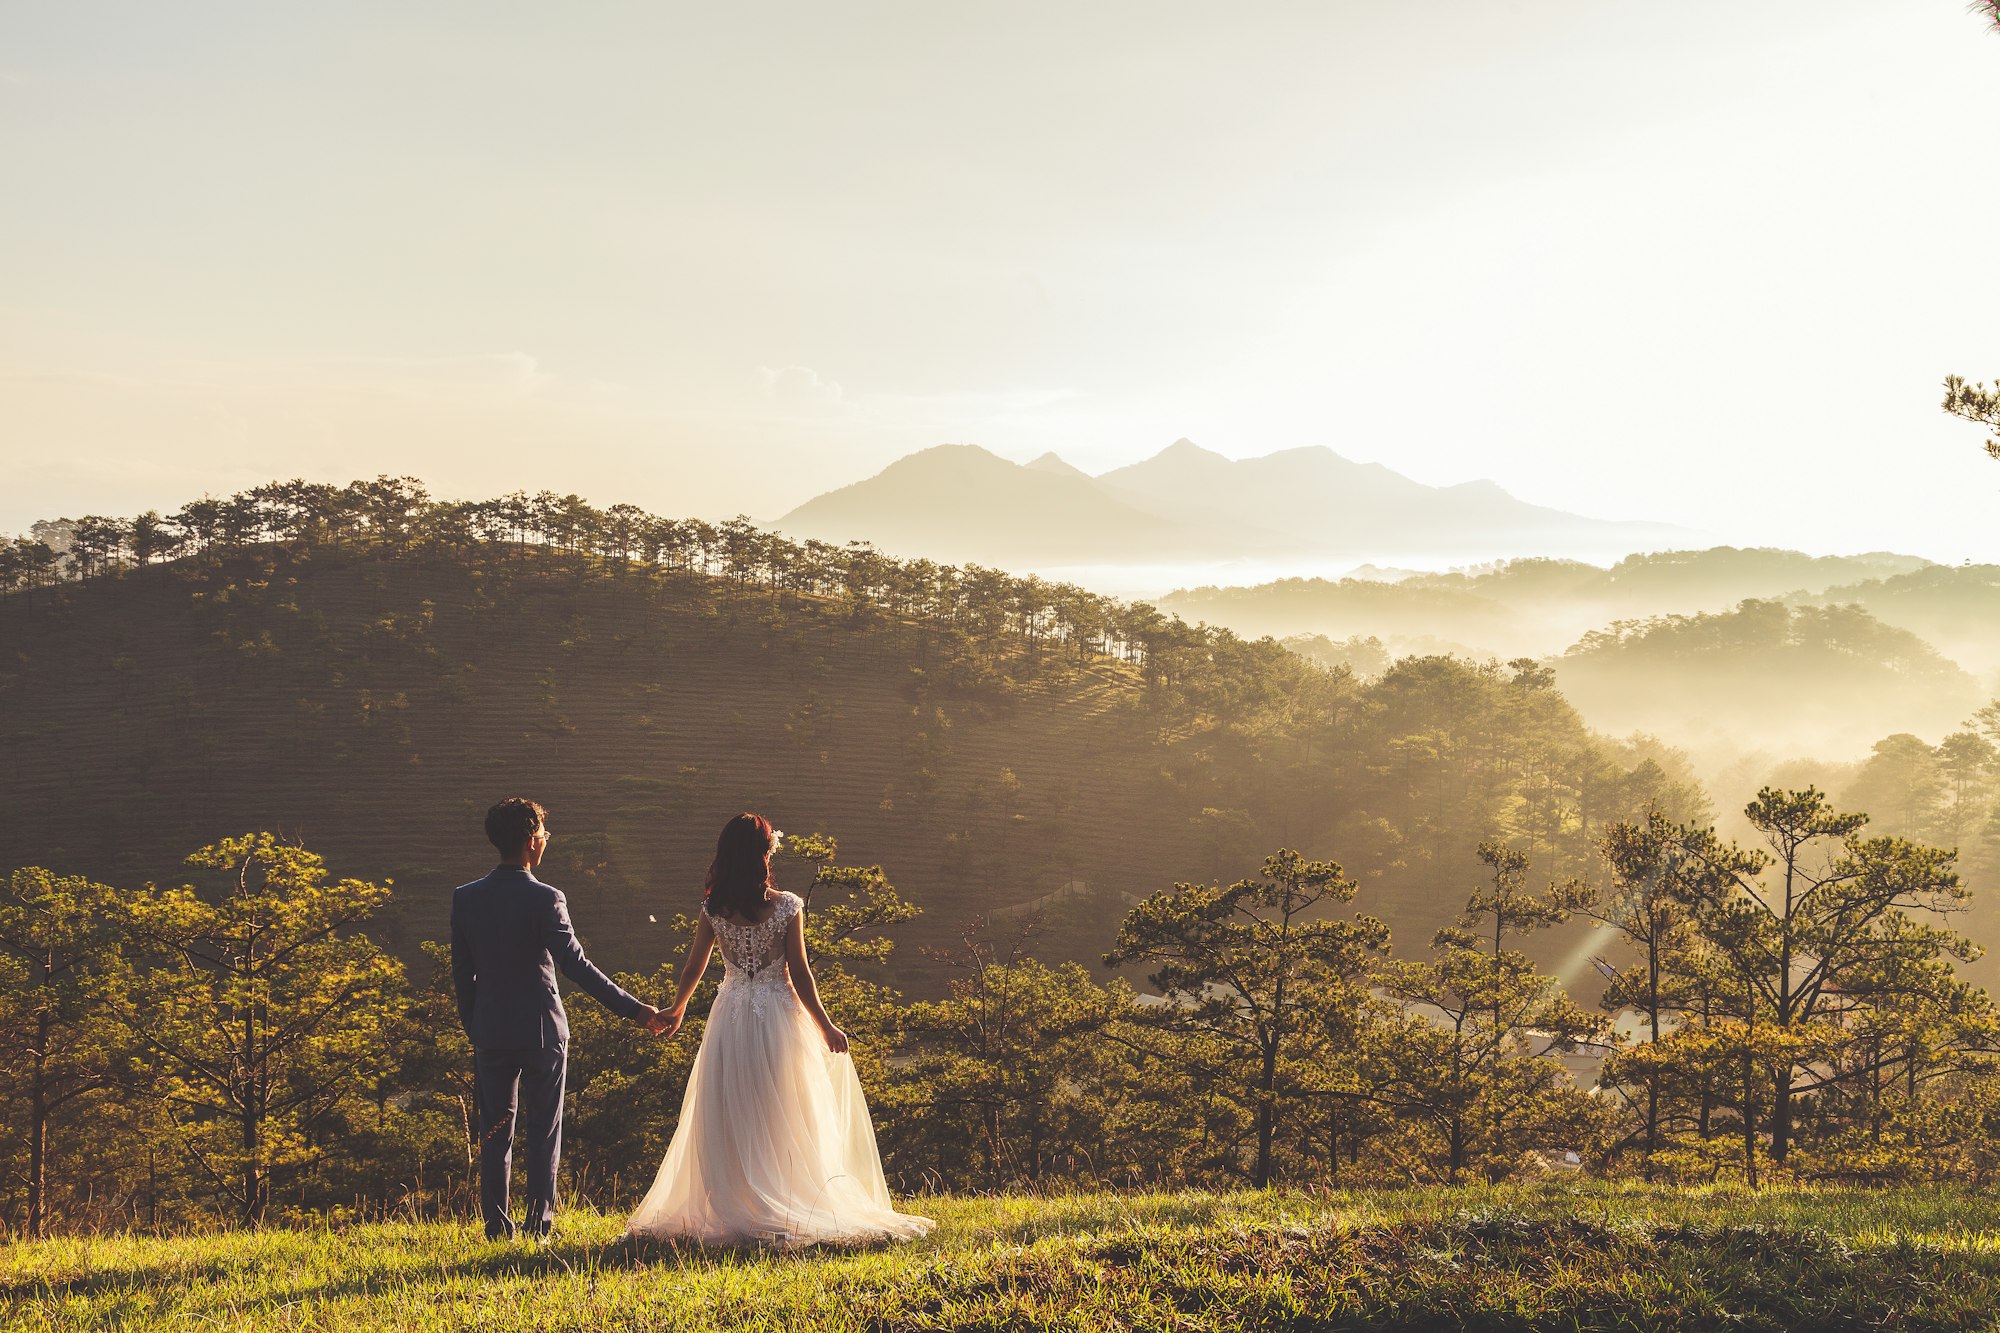 6 Tips to capture the Beauty of Spring Weddings